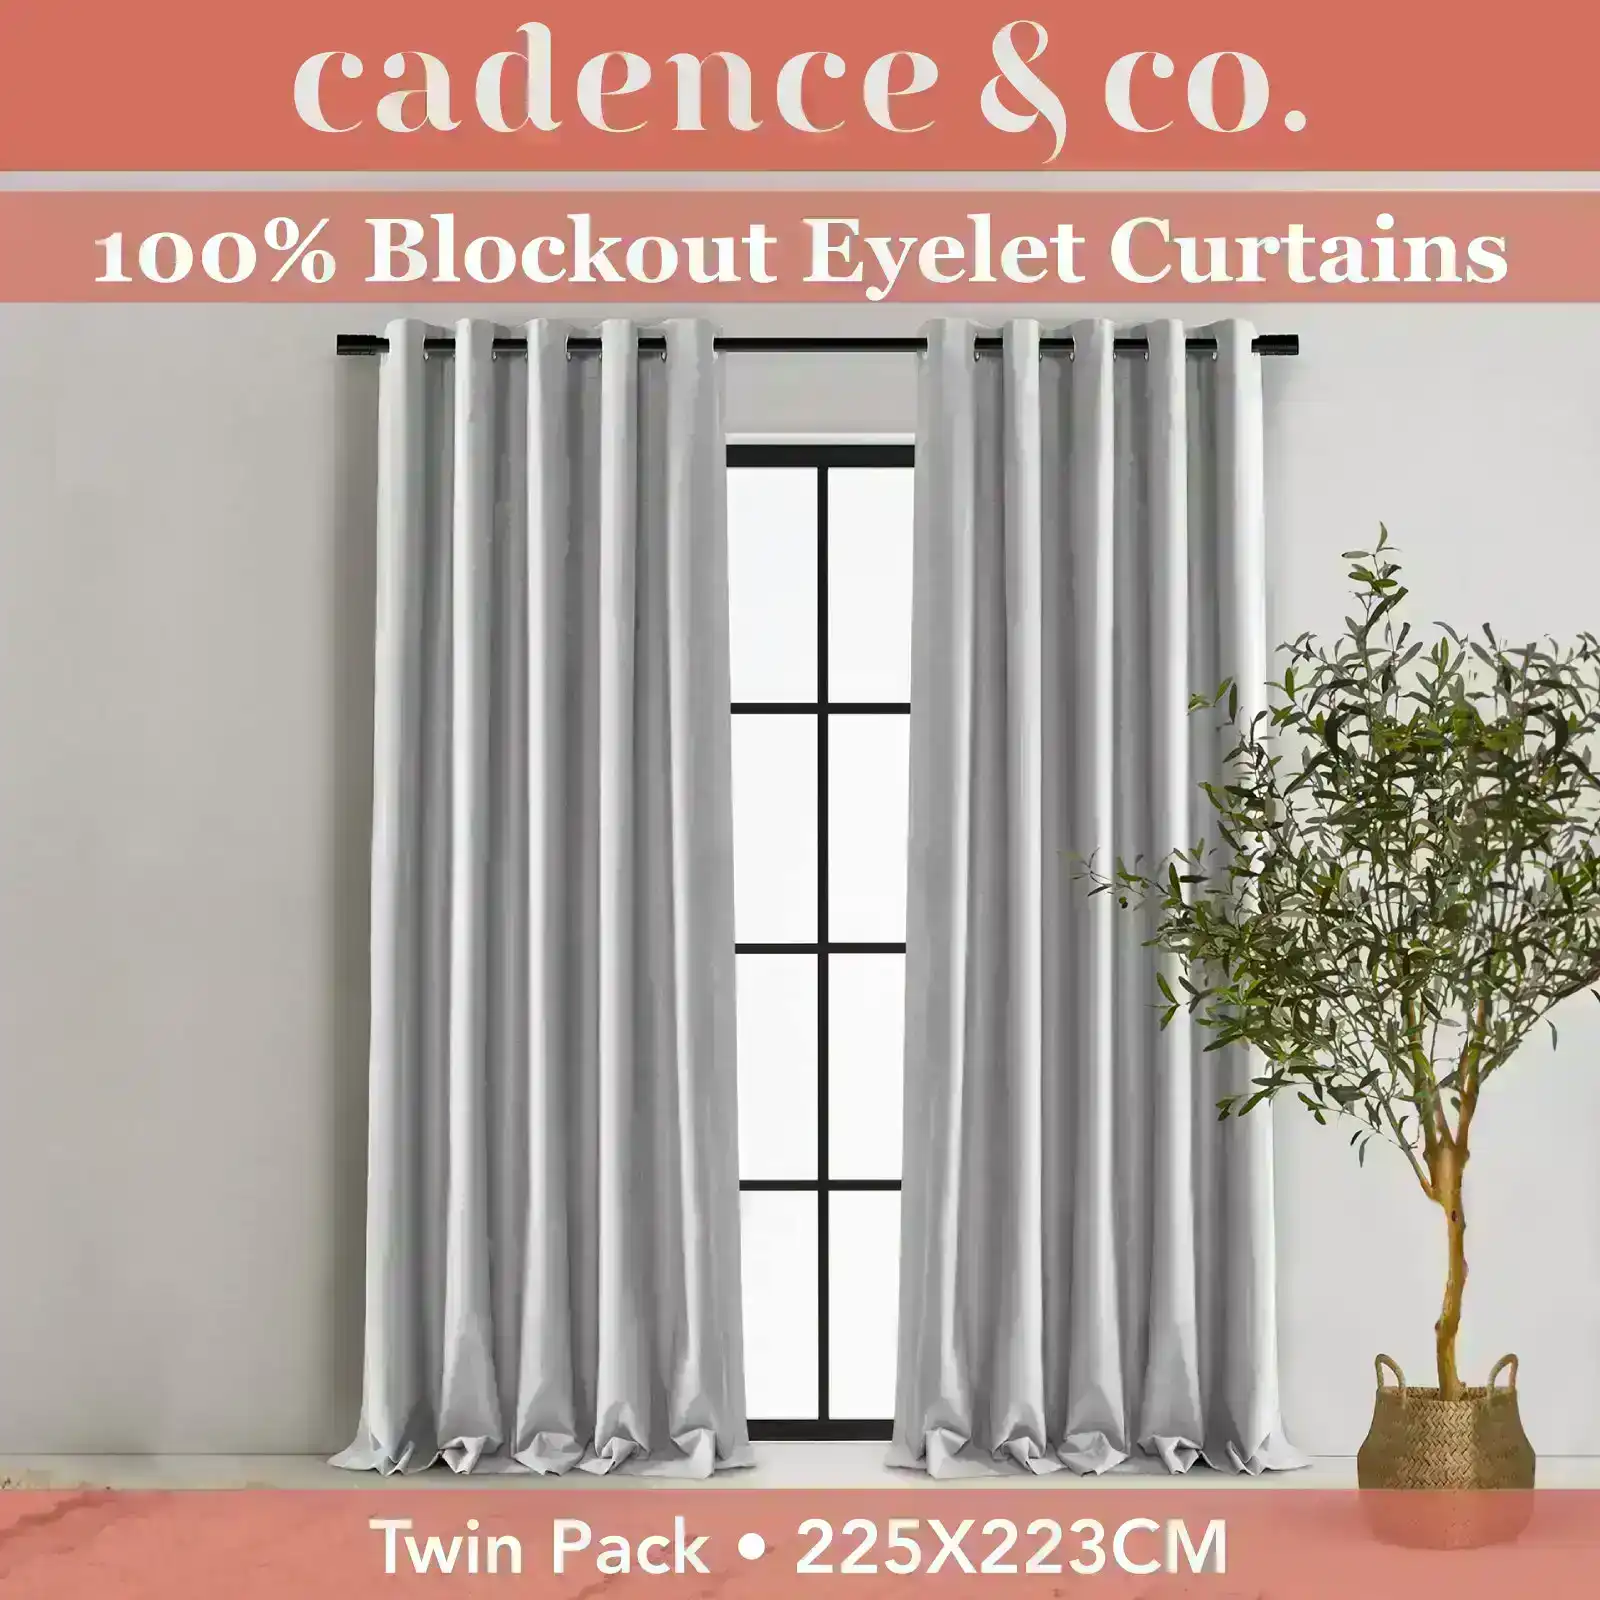 Cadence & Co Byron Matte Velvet 100% Blockout Eyelet Curtains Twin Pack Silver 225x223cm